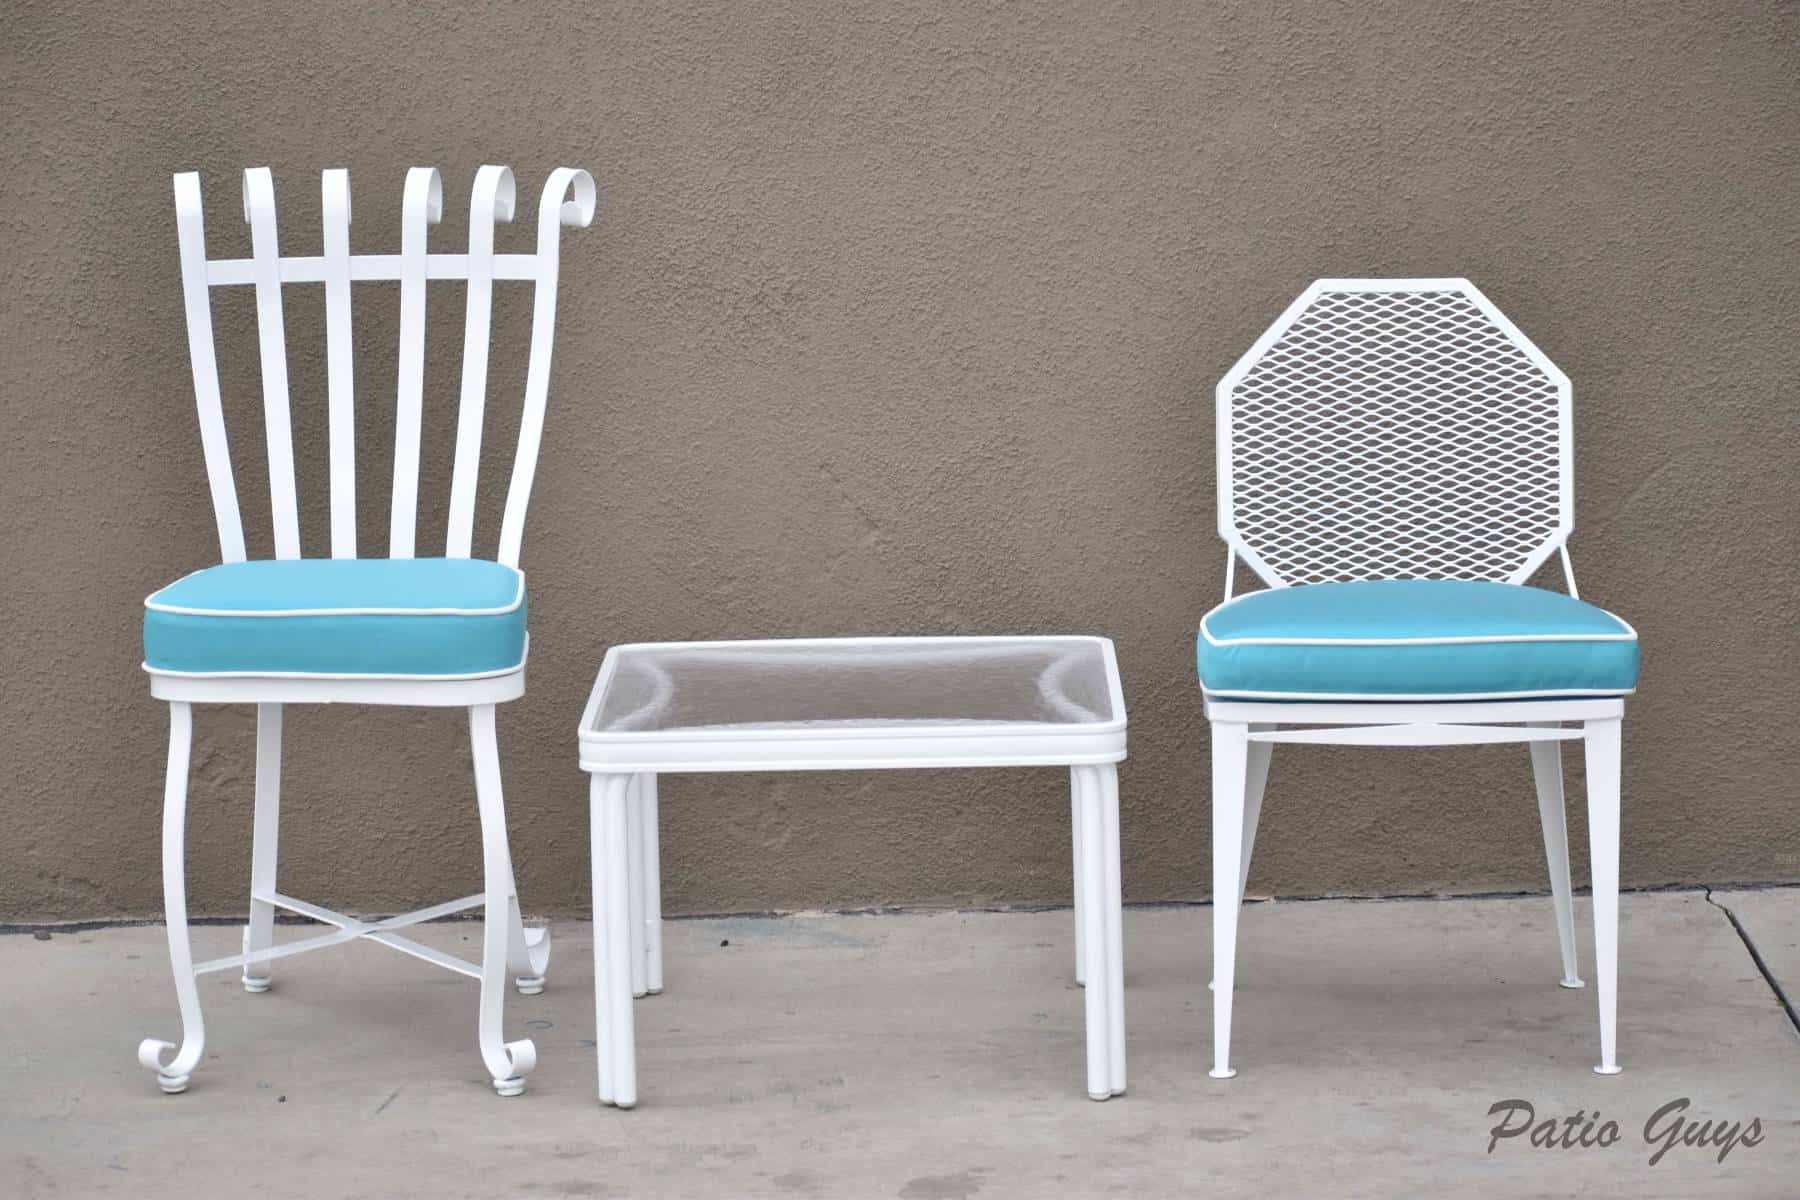 light blue cushions on white garden chairs with a side table